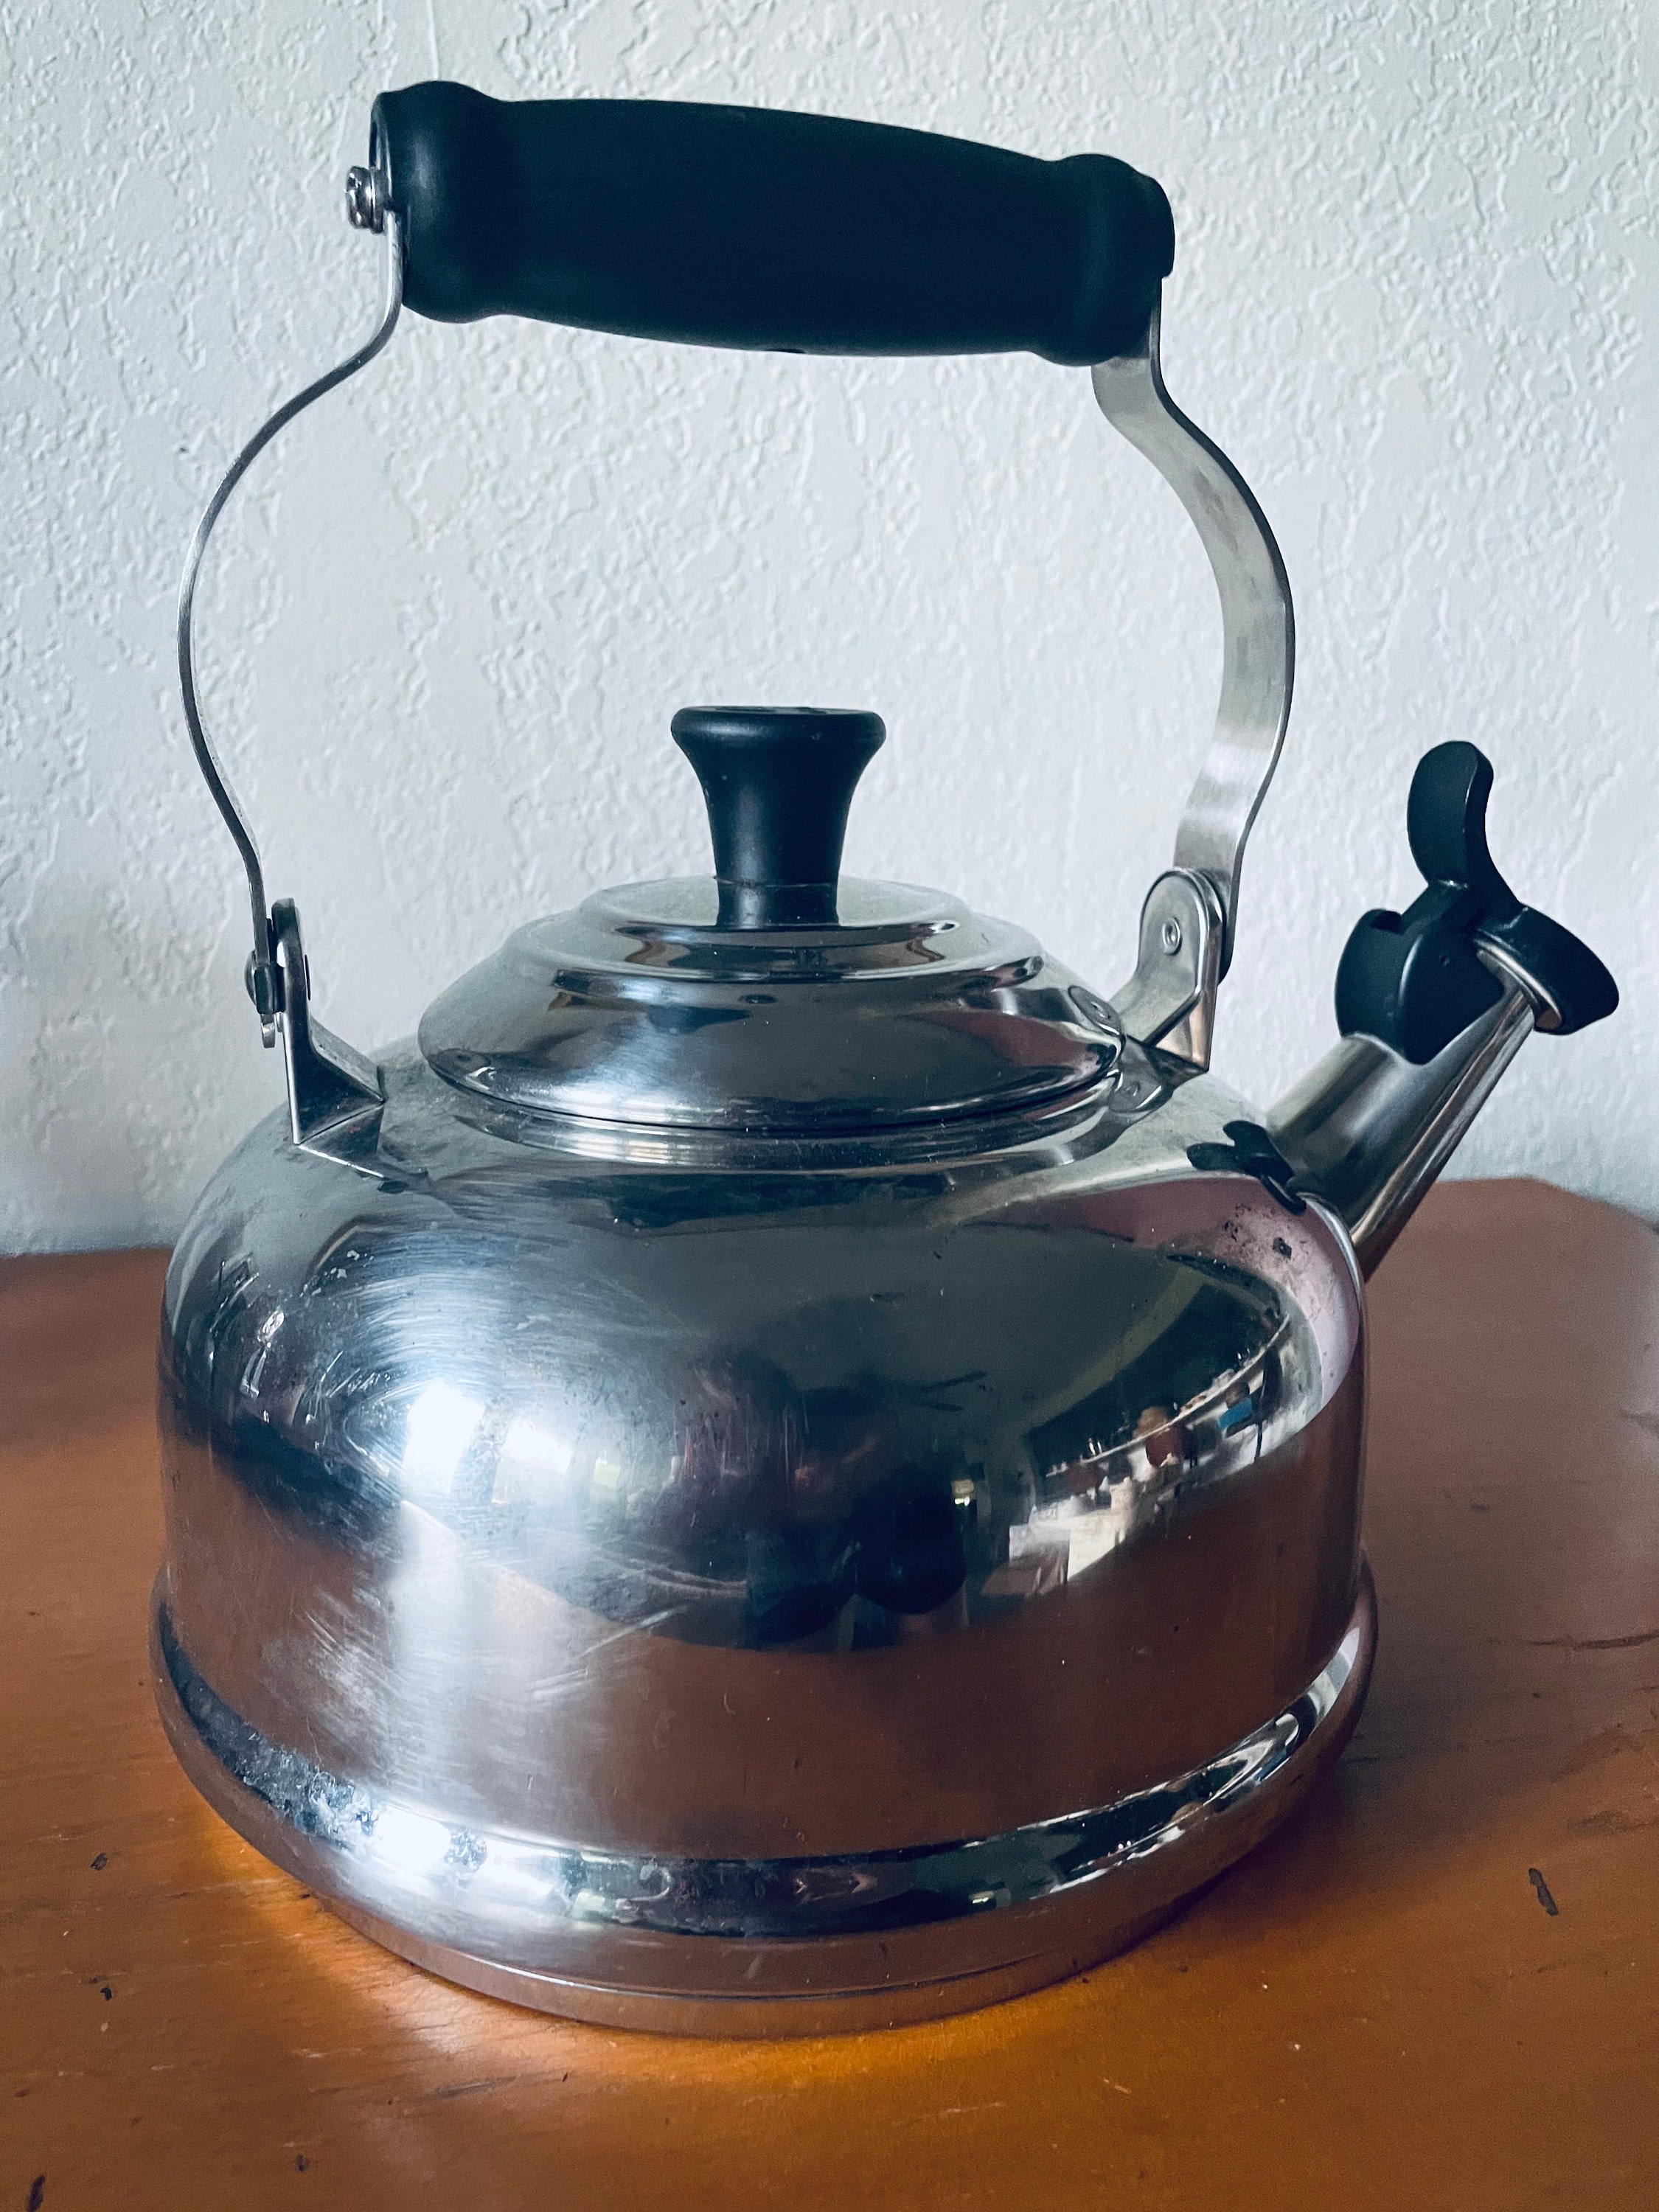 Le Creuset Stainless Steel Whistling Kettle